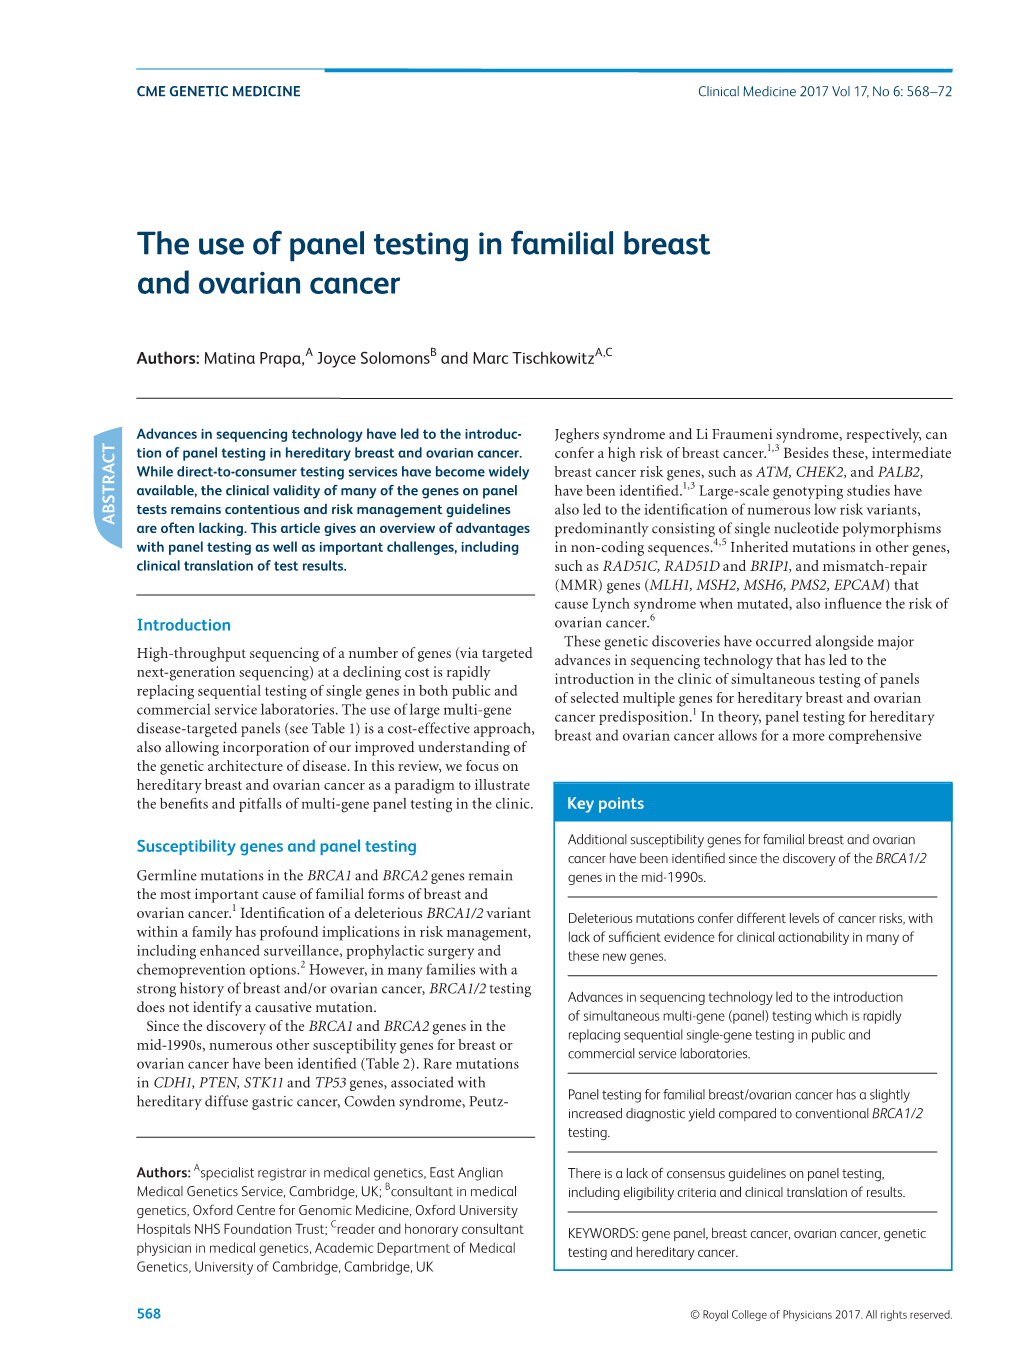 The Use of Panel Testing in Familial Breast and Ovarian Cancer